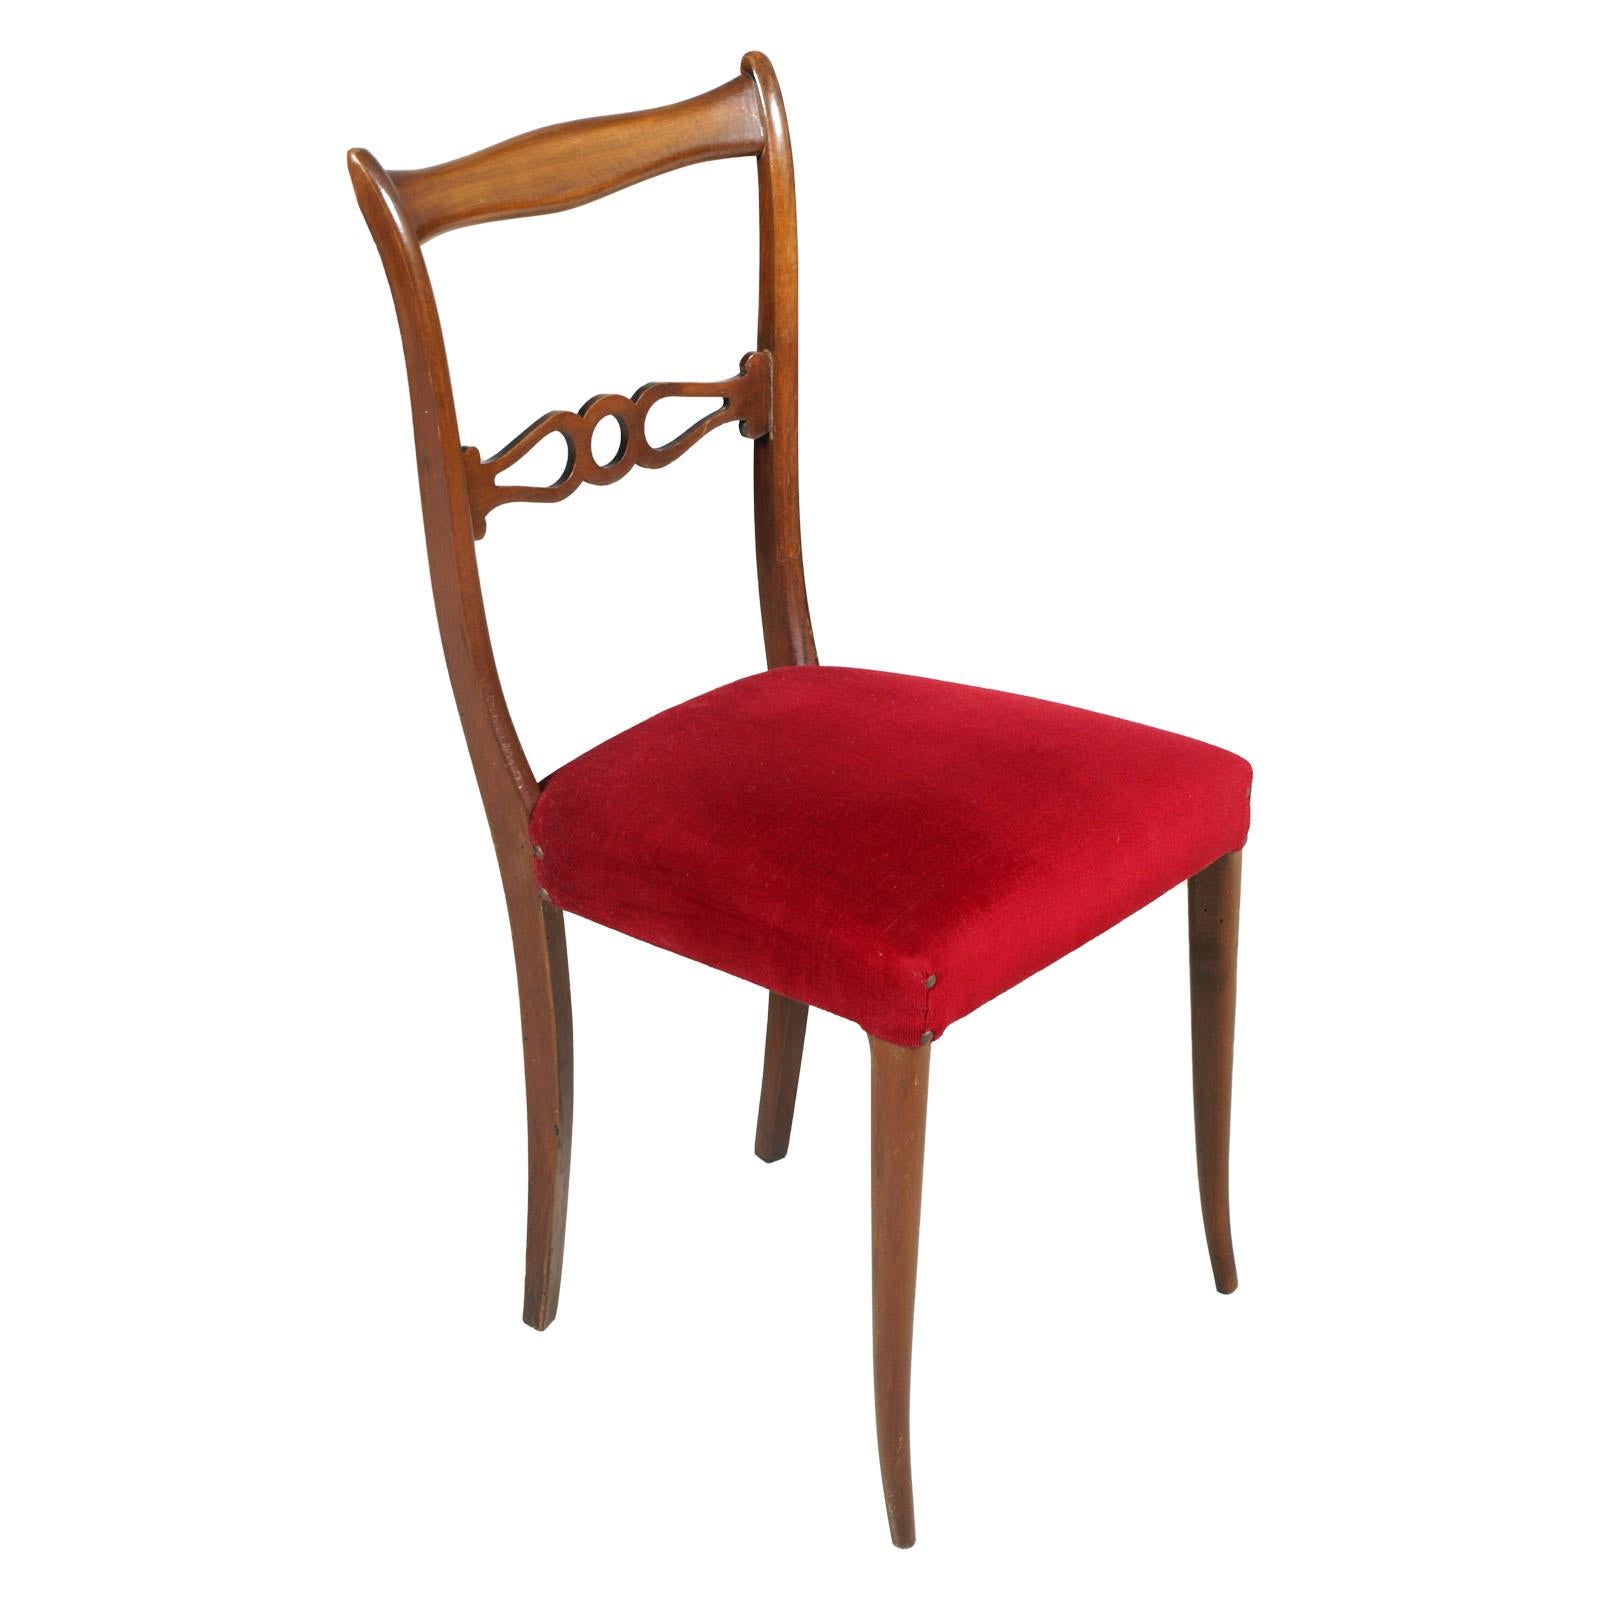 A pair of mid-20th century lacquered mahogany side chairs, Melchiorre Bega attributed. Excellent overall condition, the timber and linen in a particularly good state.
Original red velvet upholstery in good conditions.

Measures in cm: H 45 \ 92,